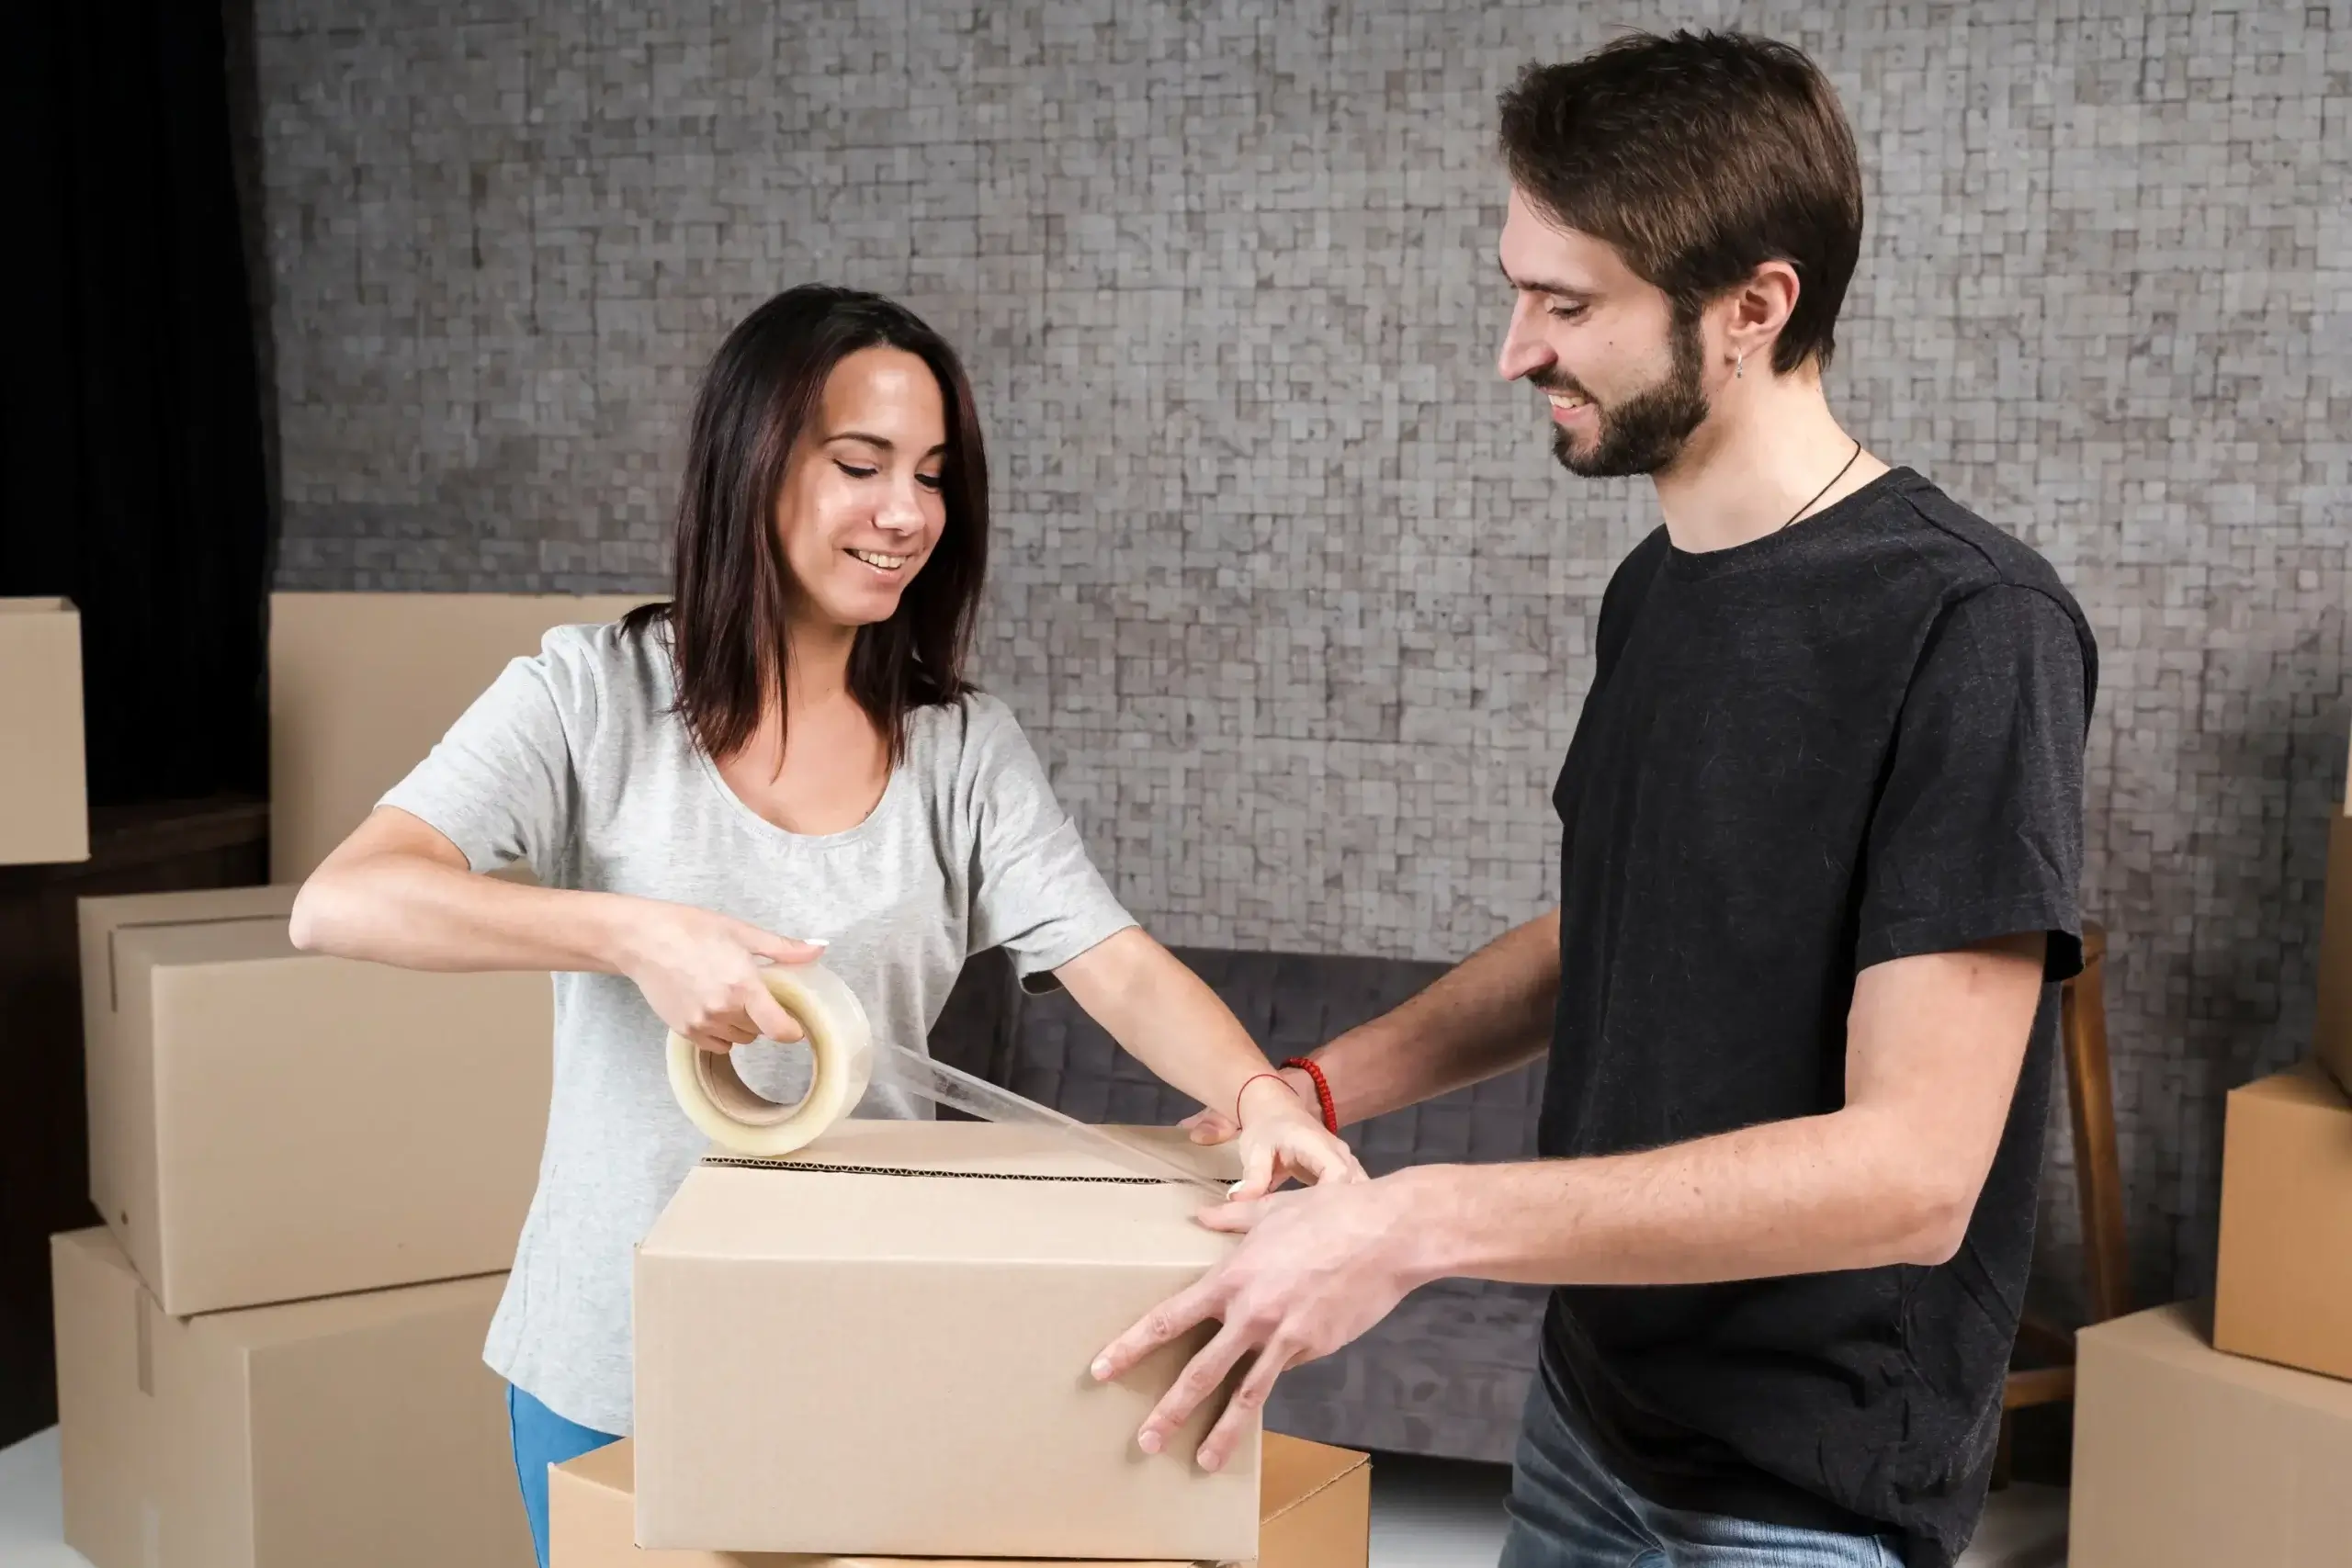 Embrace casual mindset while being organized for stress-free moving.